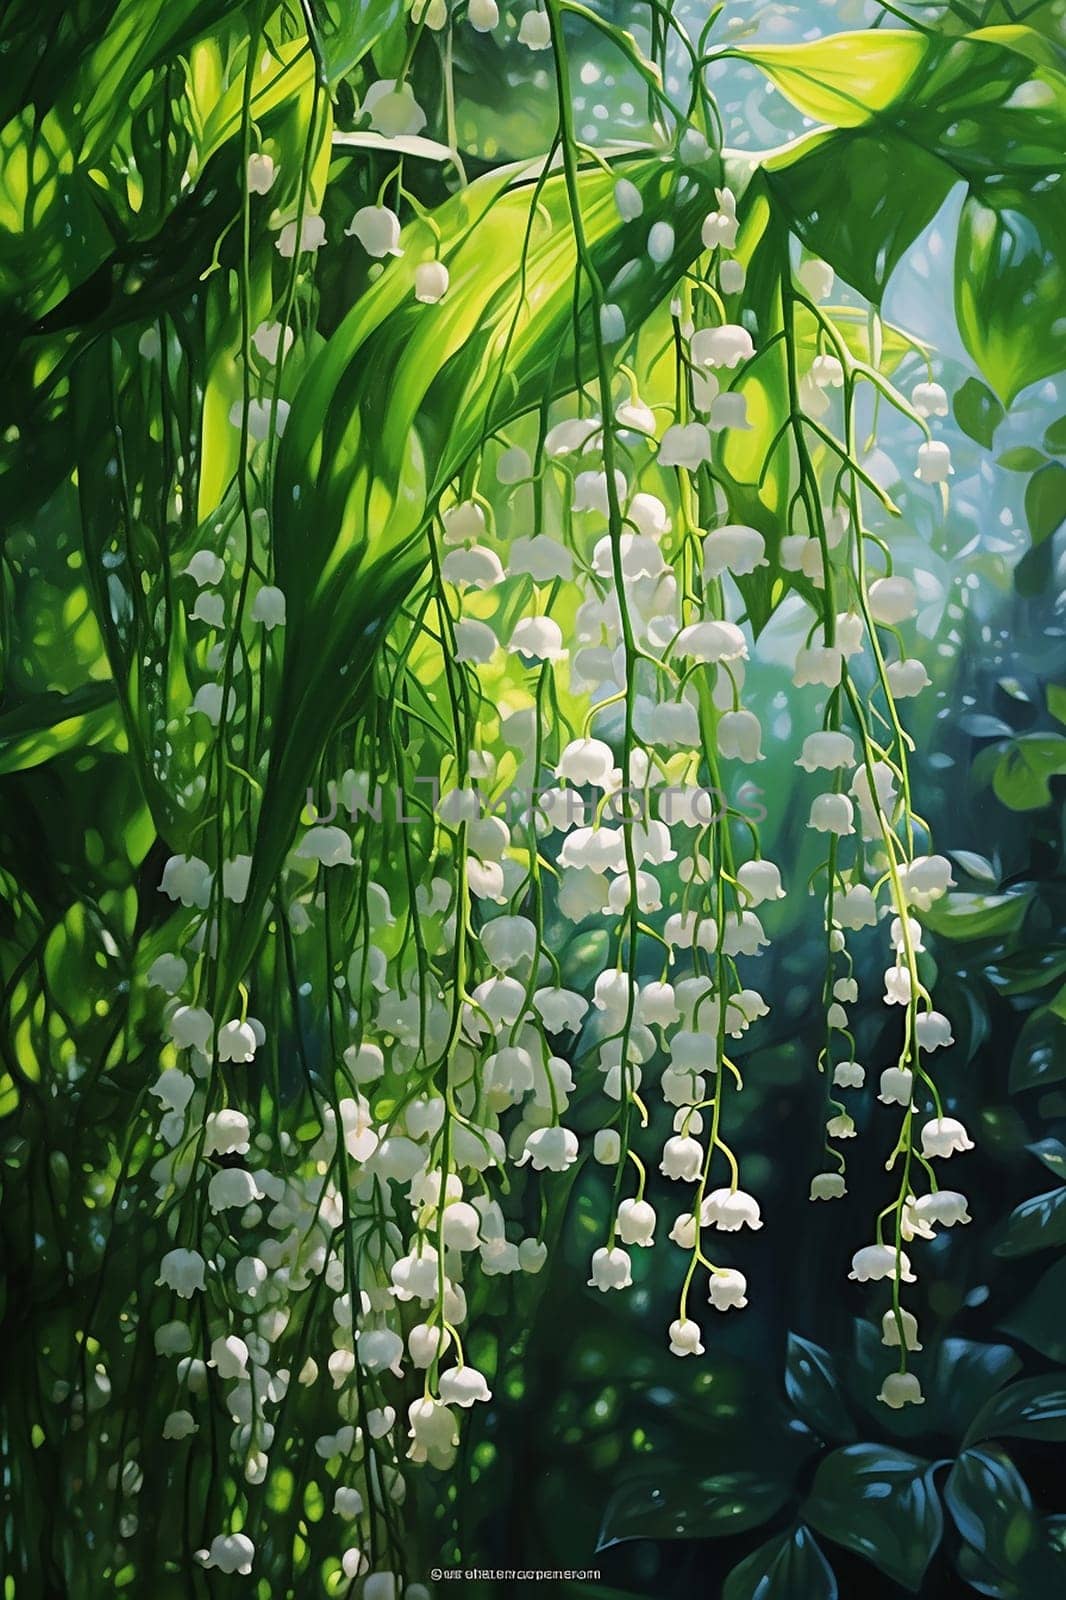 Delicate white flowers hanging amongst lush green foliage bathed in dappled sunlight.